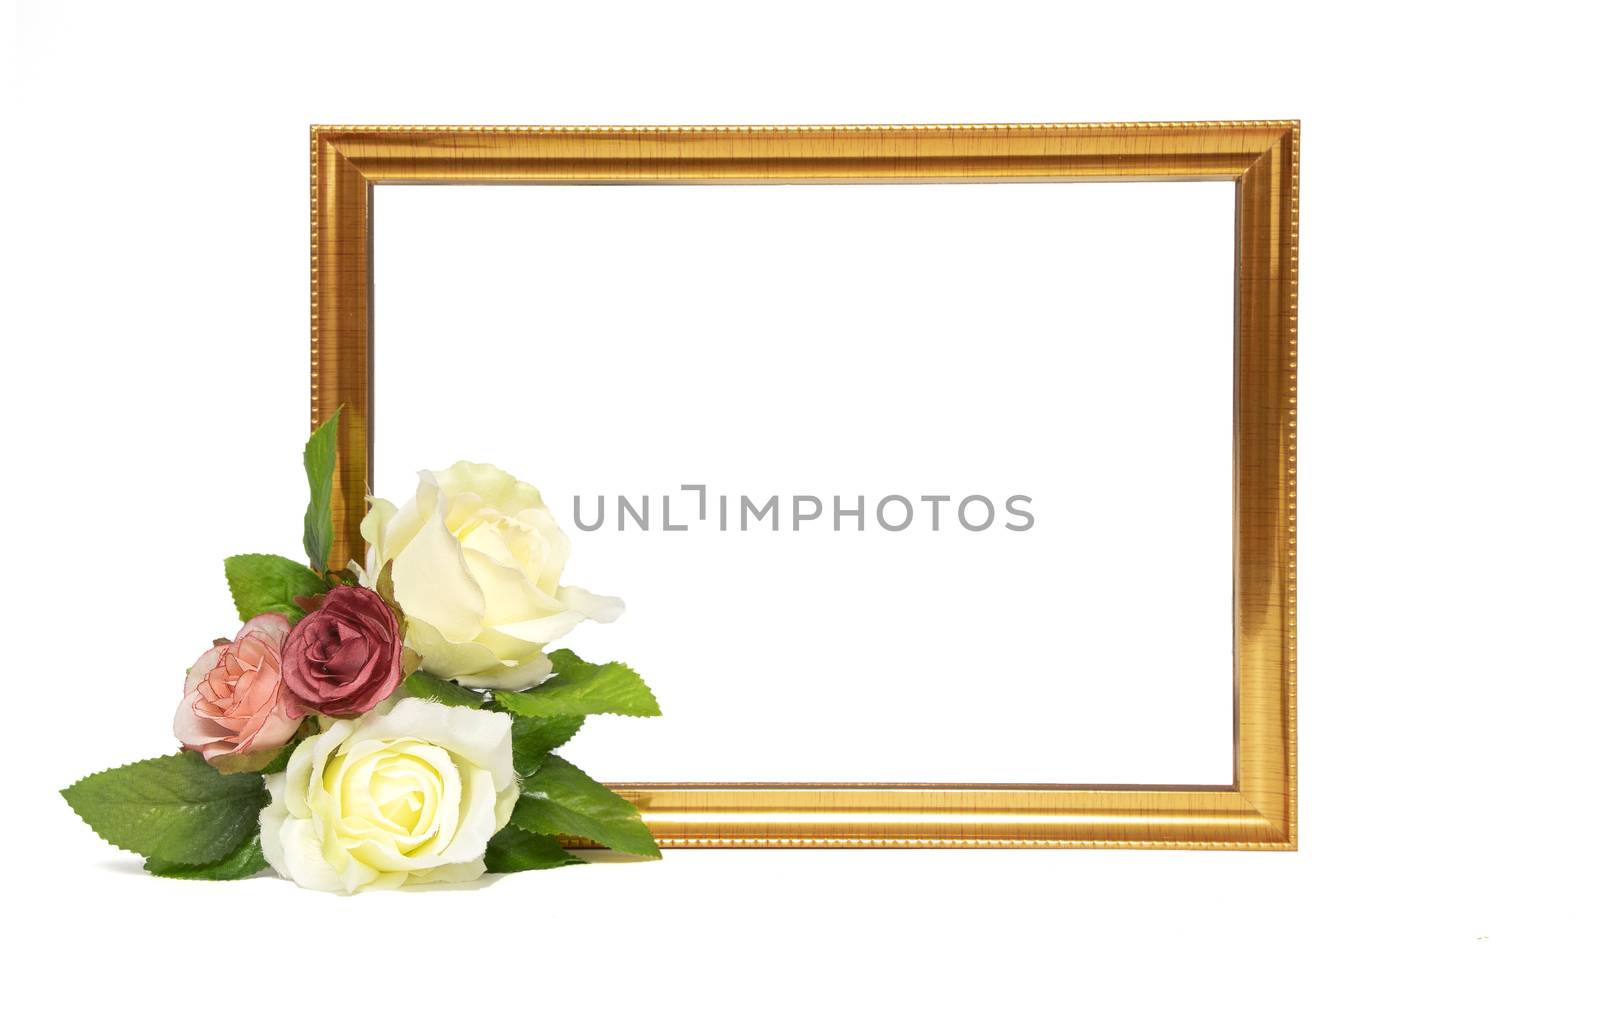 Vintage gold colored wooden frame and beautiful flowers. Mock up template with copy space for text. White background.